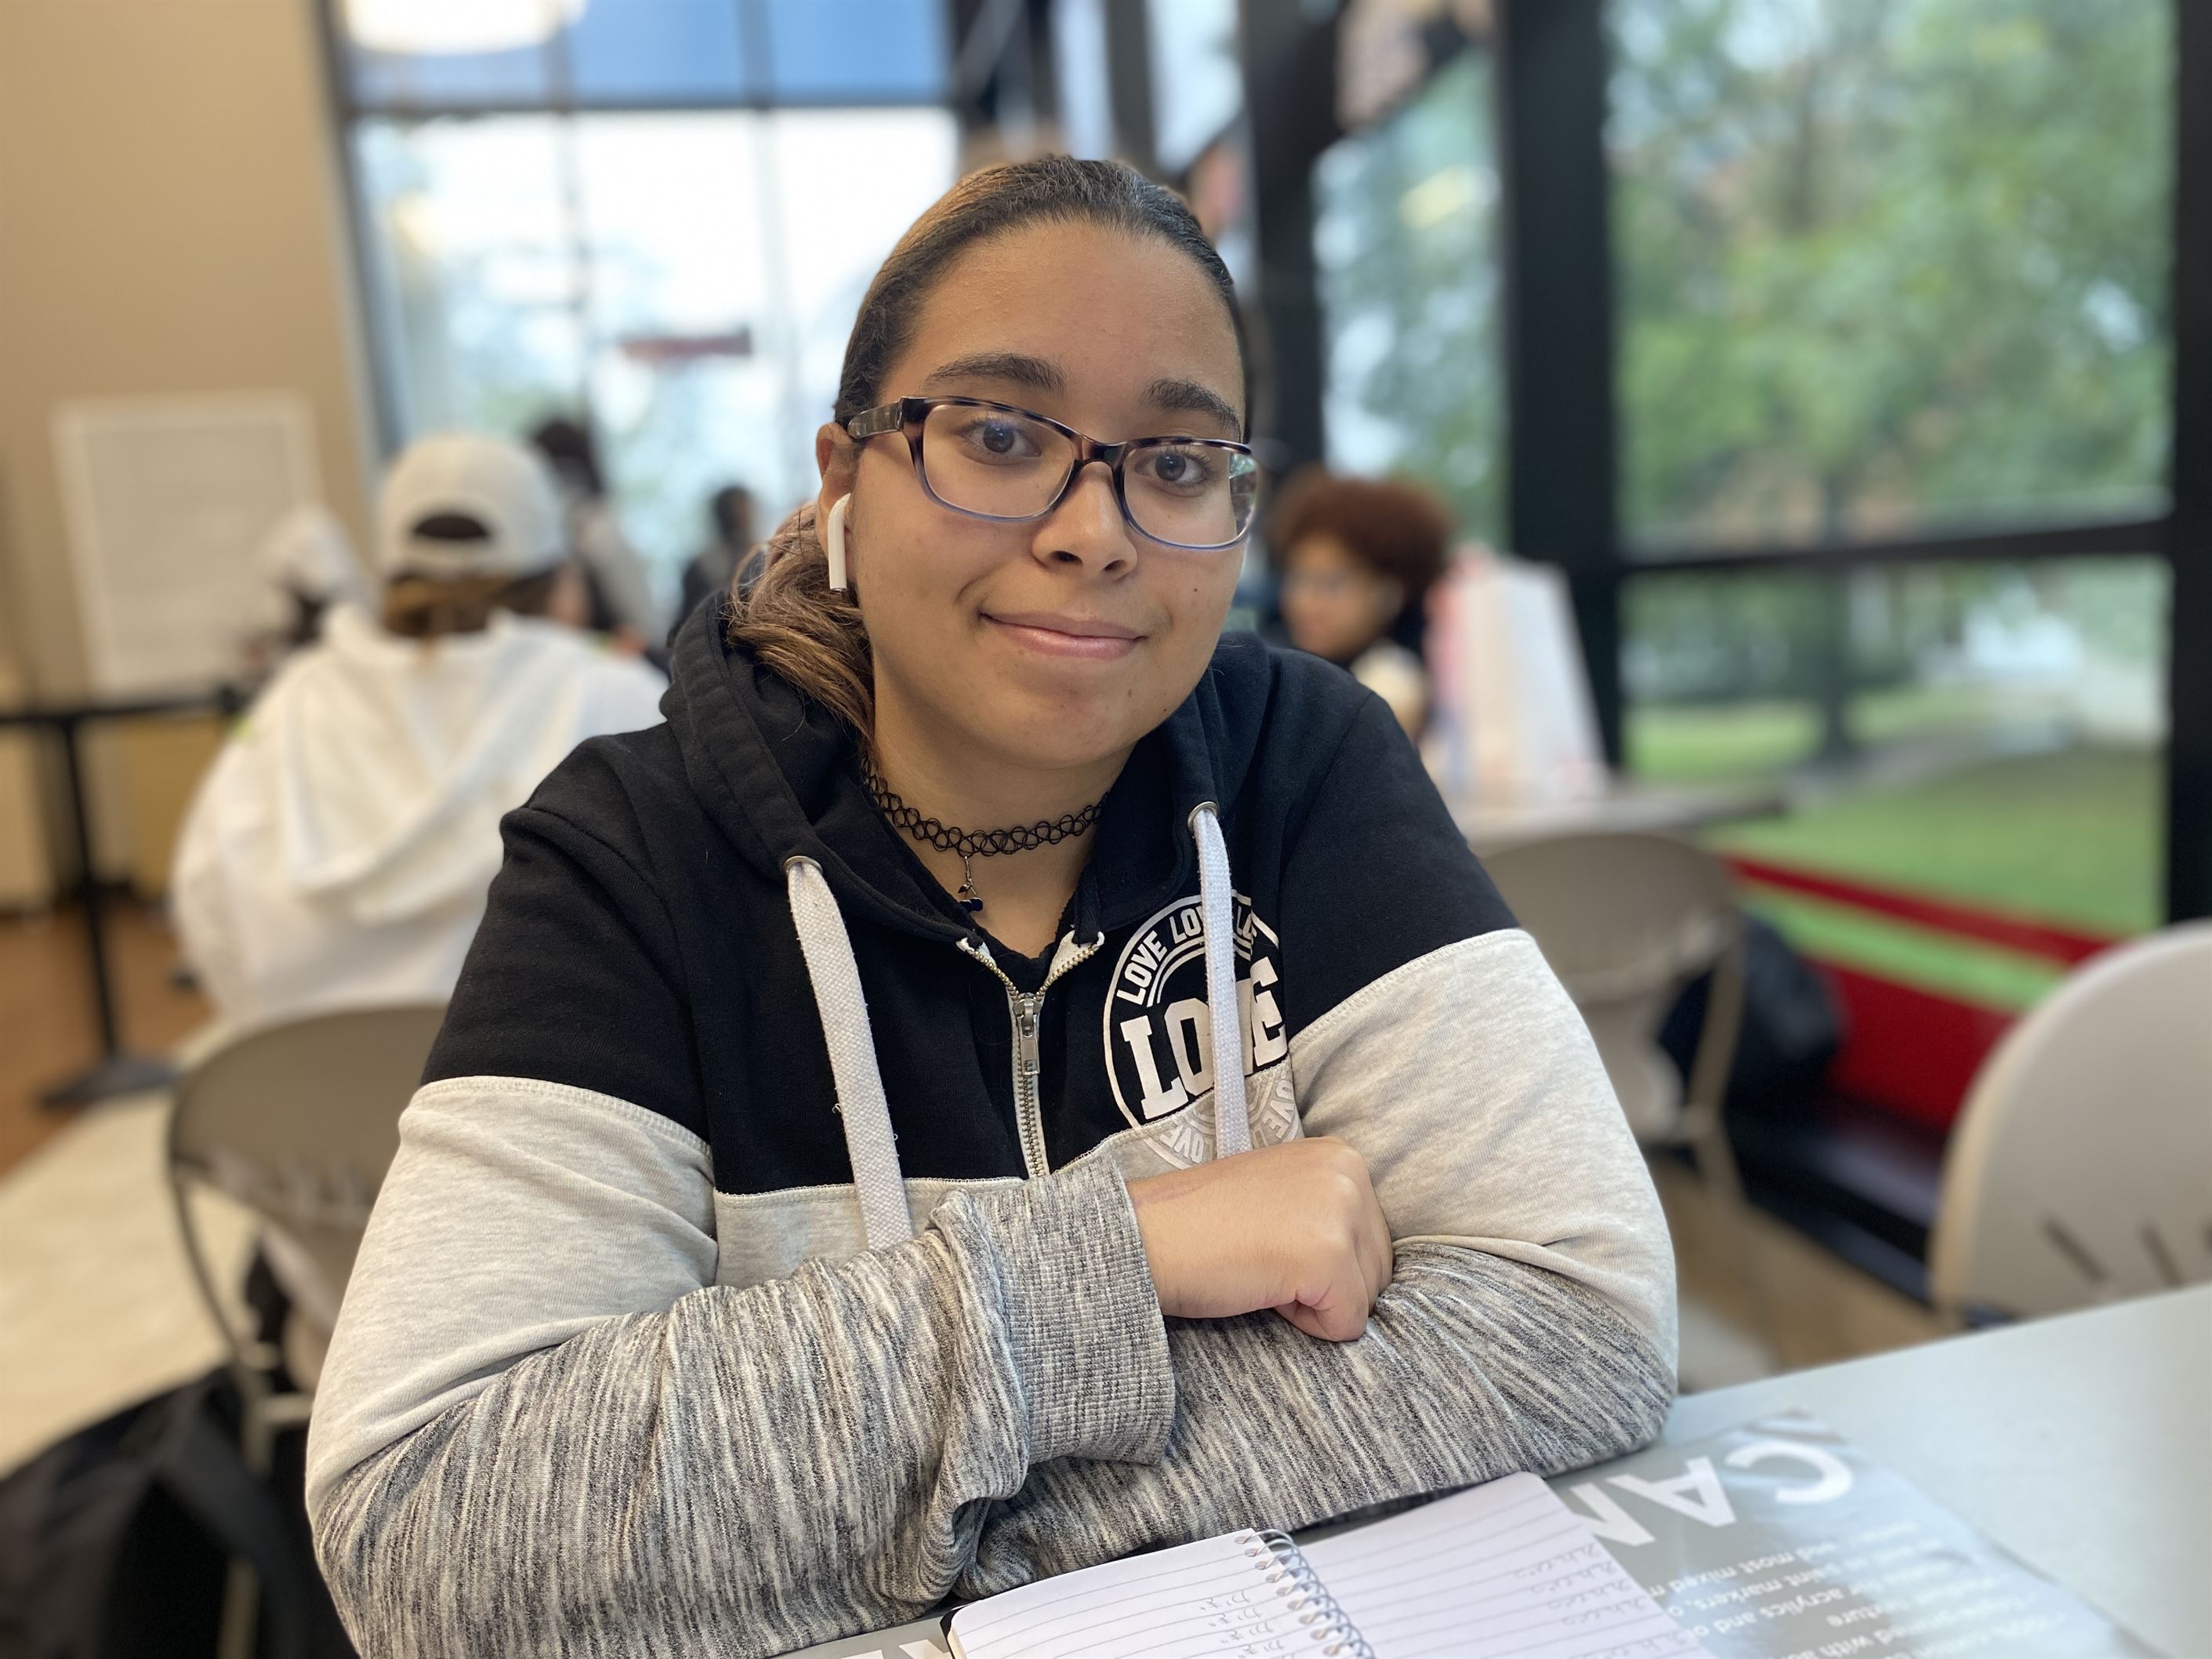 Genesis Garcia-Morales, a sophomore visual arts major, said that she appreciated how the university was trying to create healthier dining options. Sal DiMaggio | The Montclarion